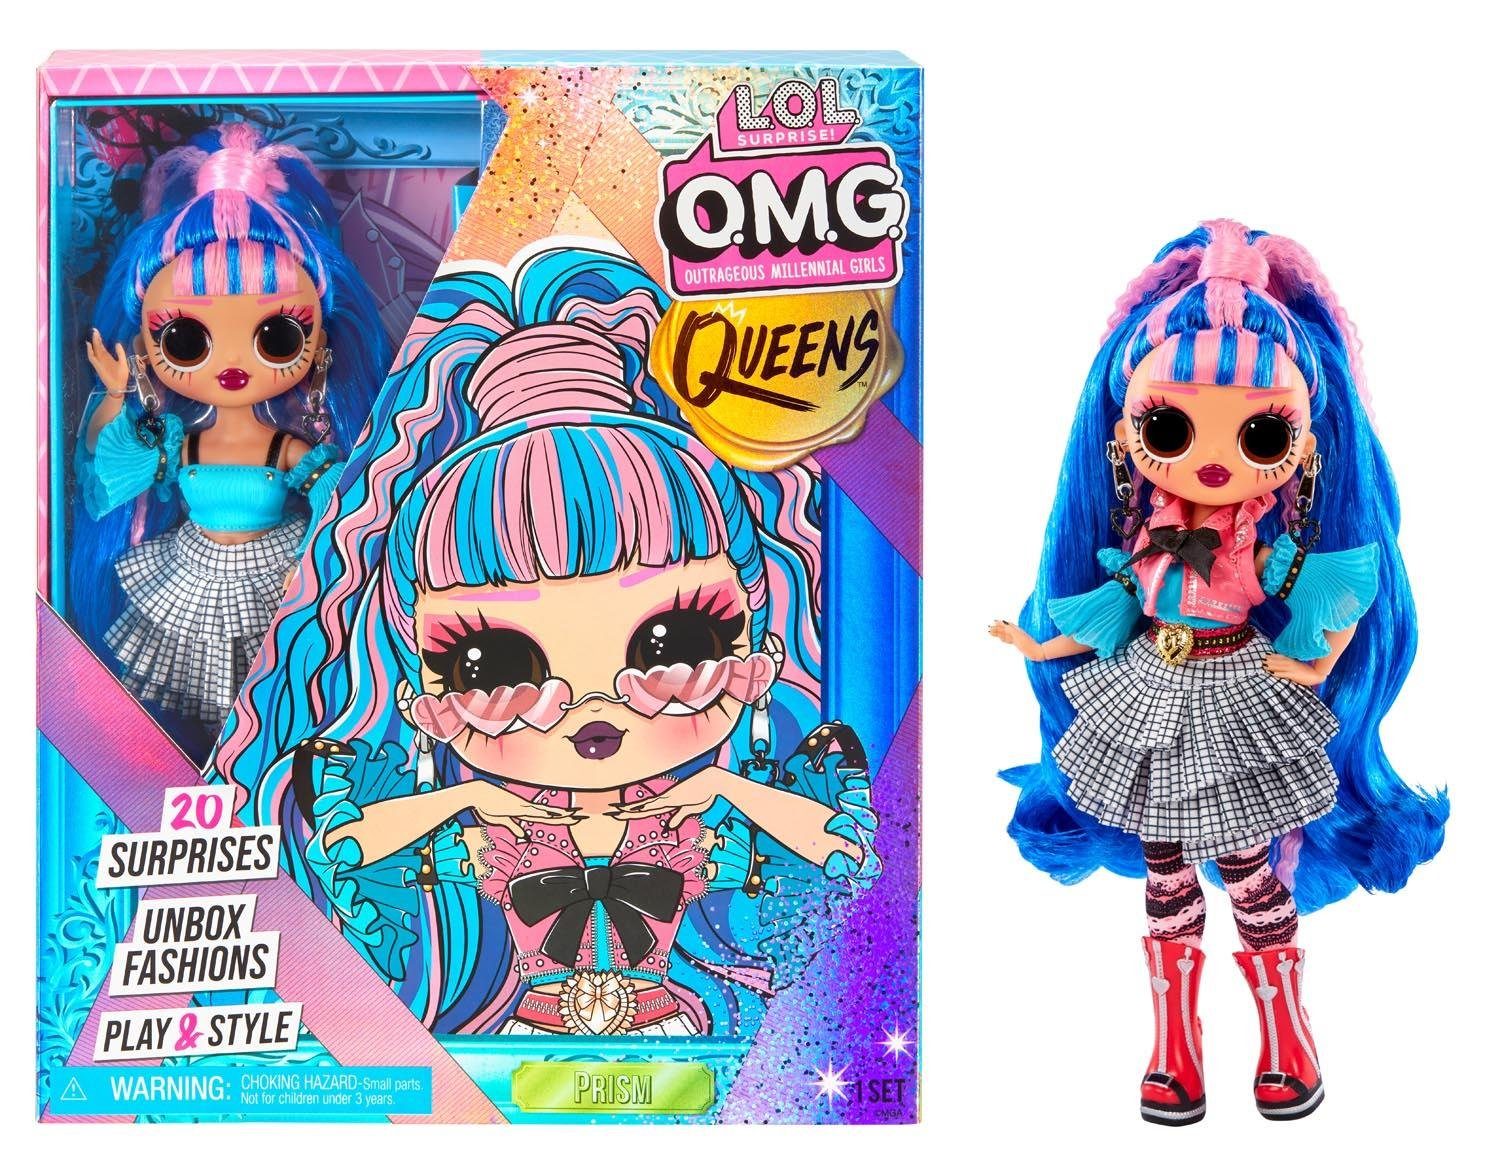 Prism 579915EUC MGA ENTERTAINMENT MGA Surprise Entertainment OMG L.O.L. Anziehpuppe - - Queens